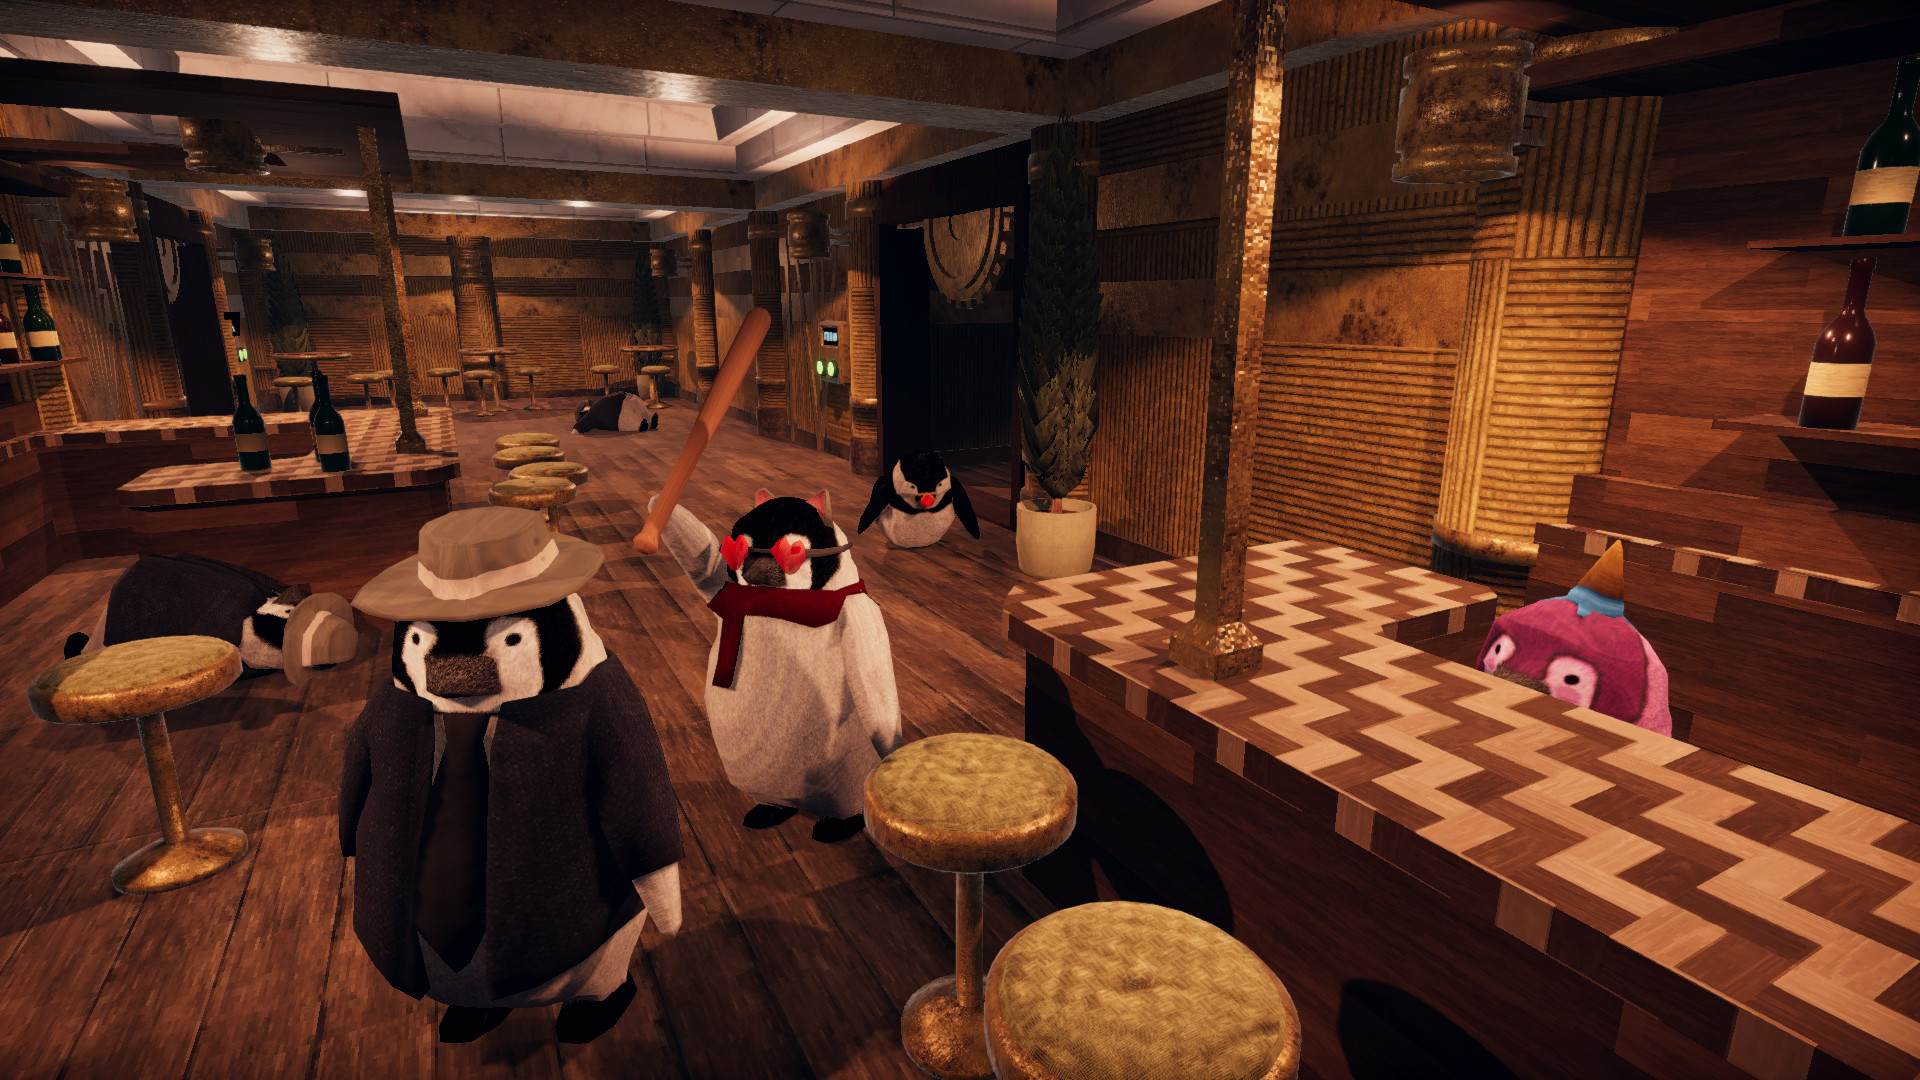 a bunch of wiley penguins hanging out a saloon. there is a bar tender penguin that you can barely see over the height of the bar.